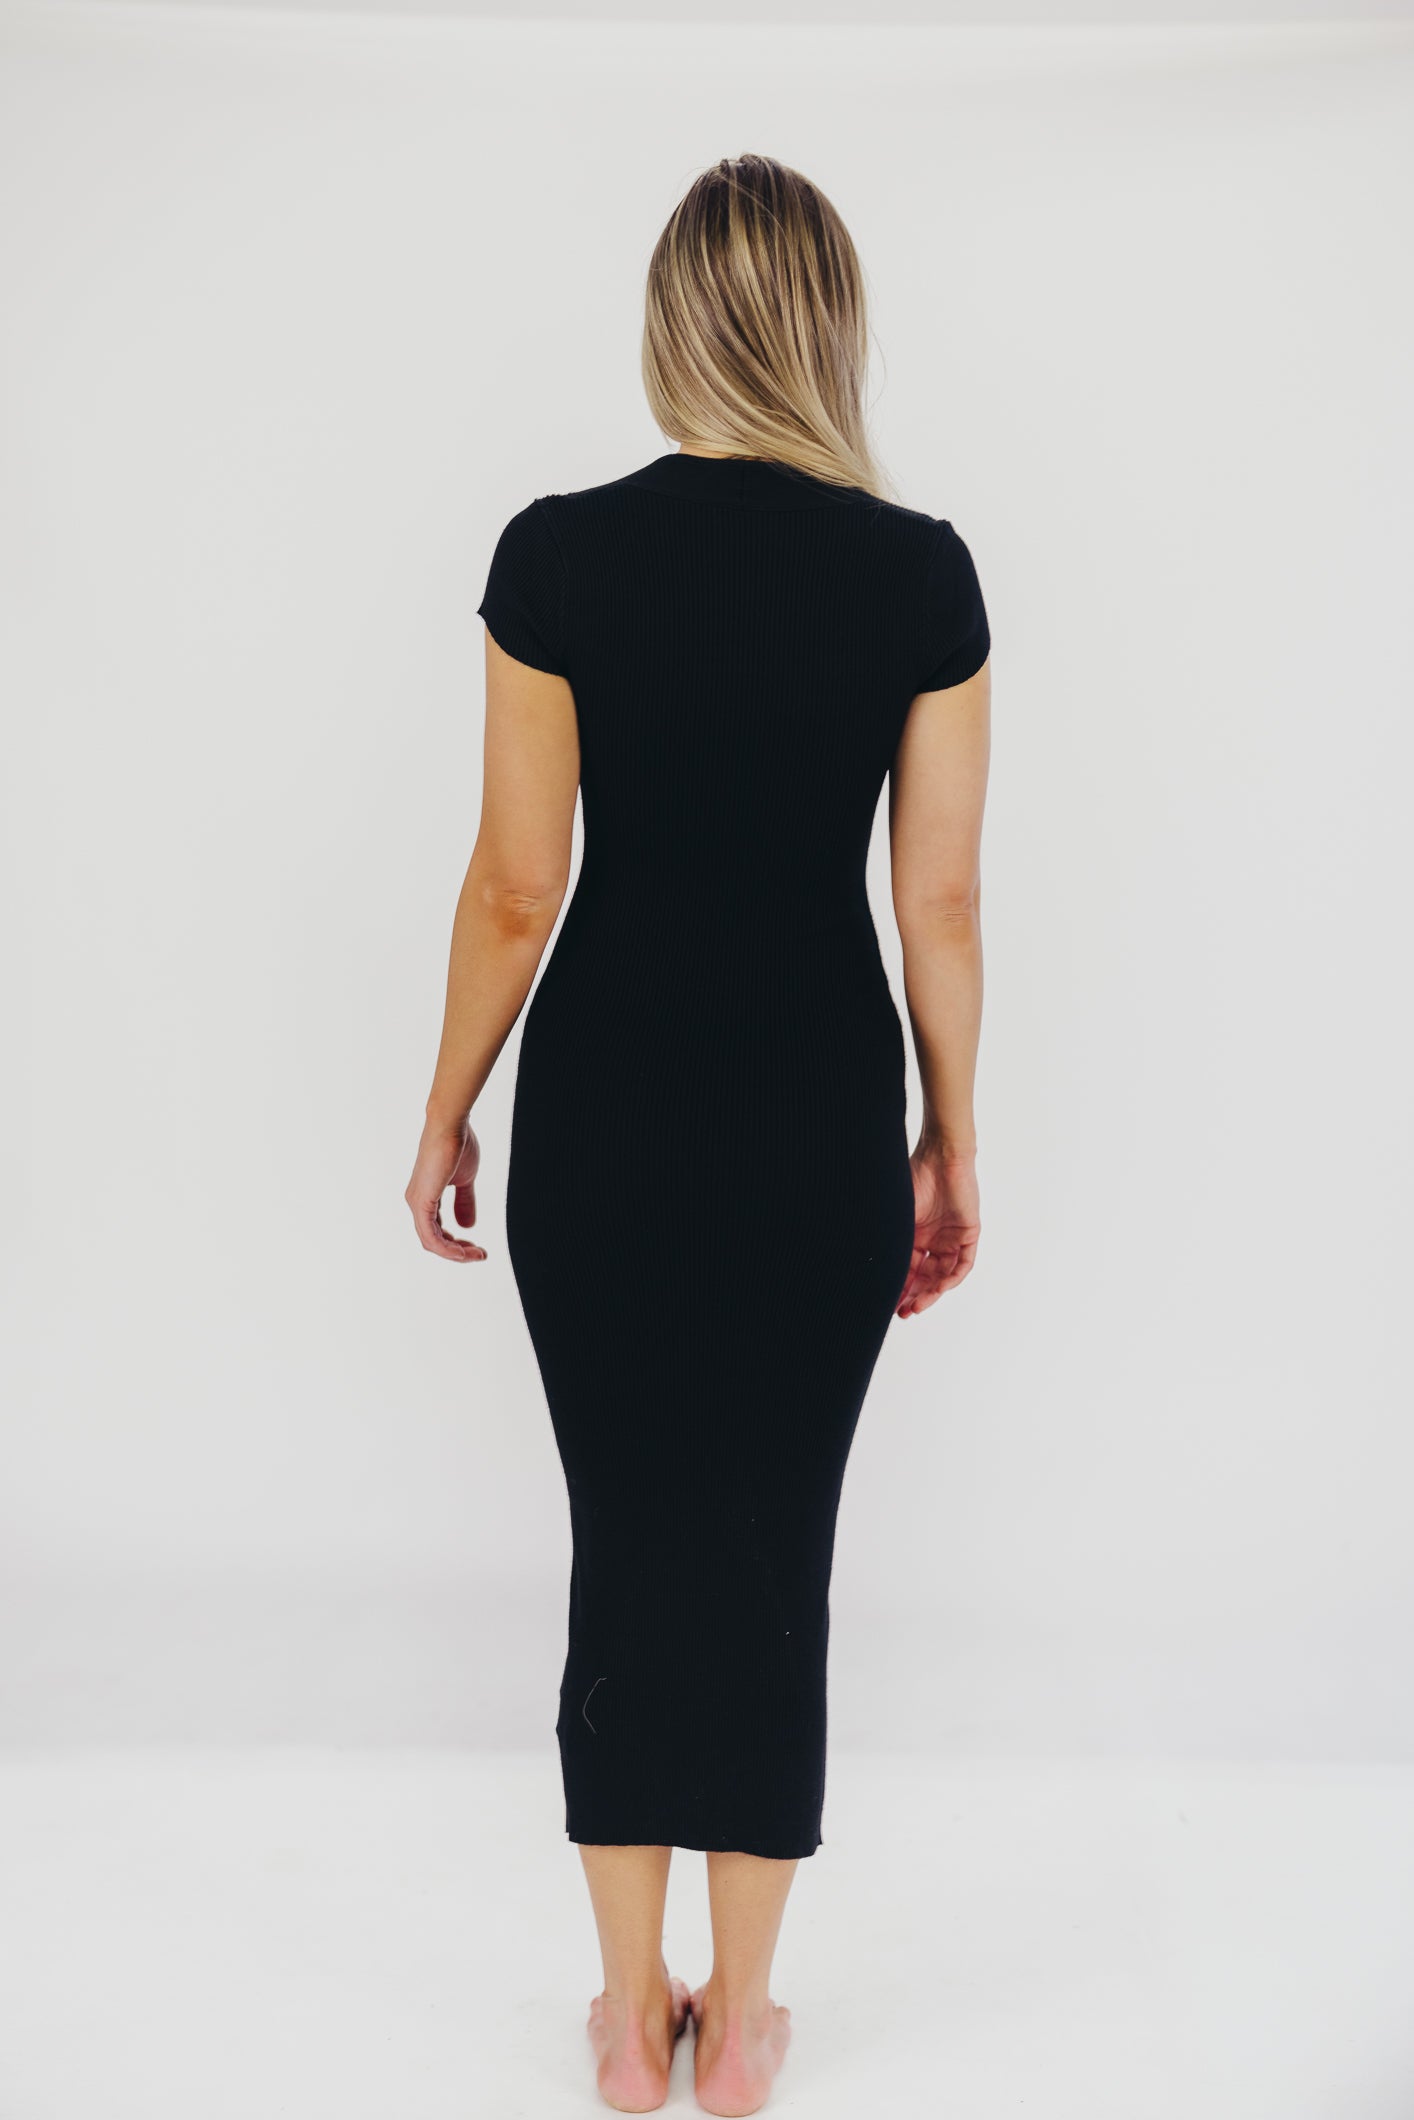 Wren Ribbed Knit Maxi Dress with Square Neckline in Black (XS-XL) - Worth Collective Exclusive